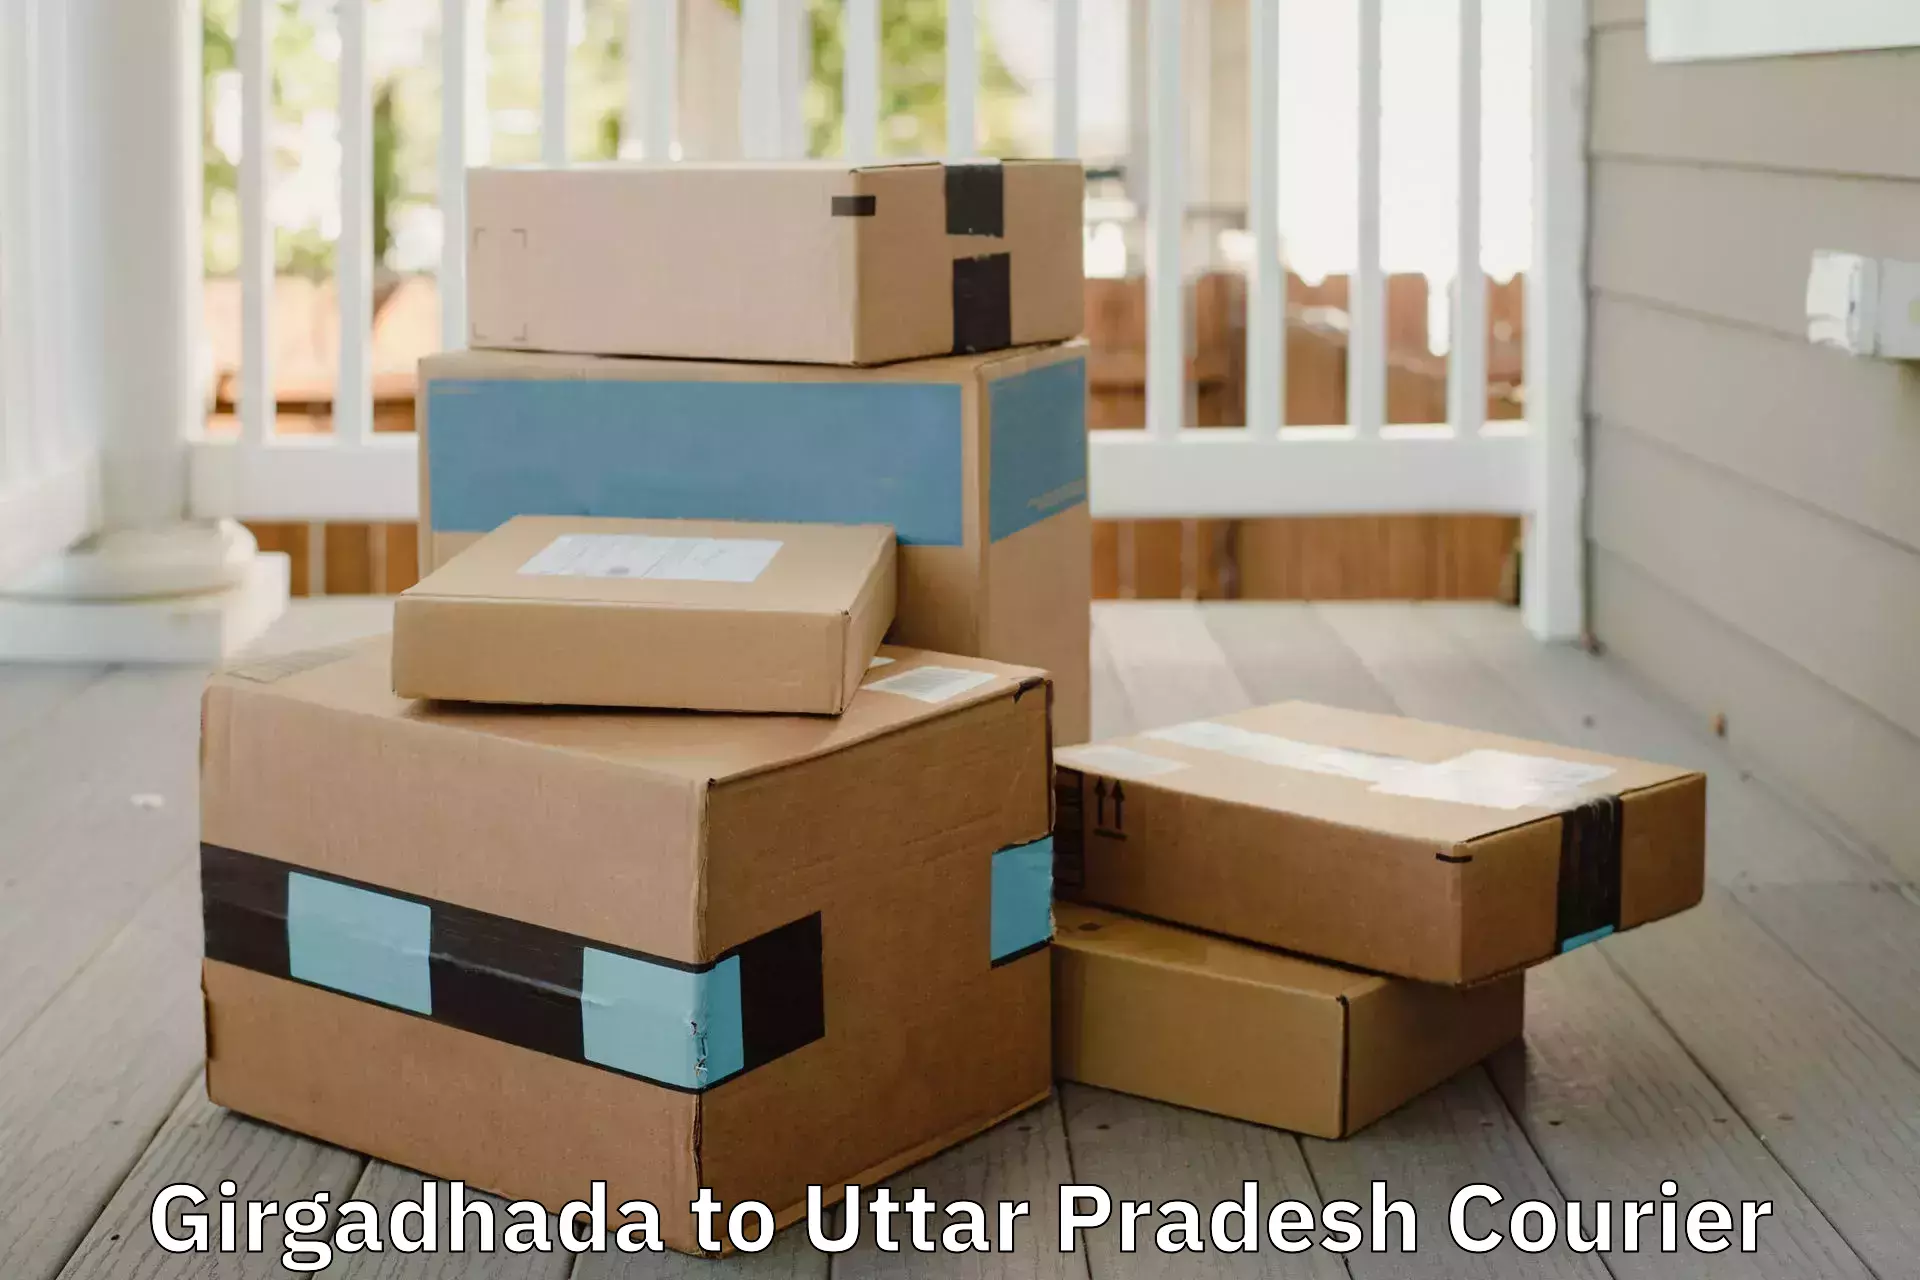 Moving and storage services in Girgadhada to Anupshahar